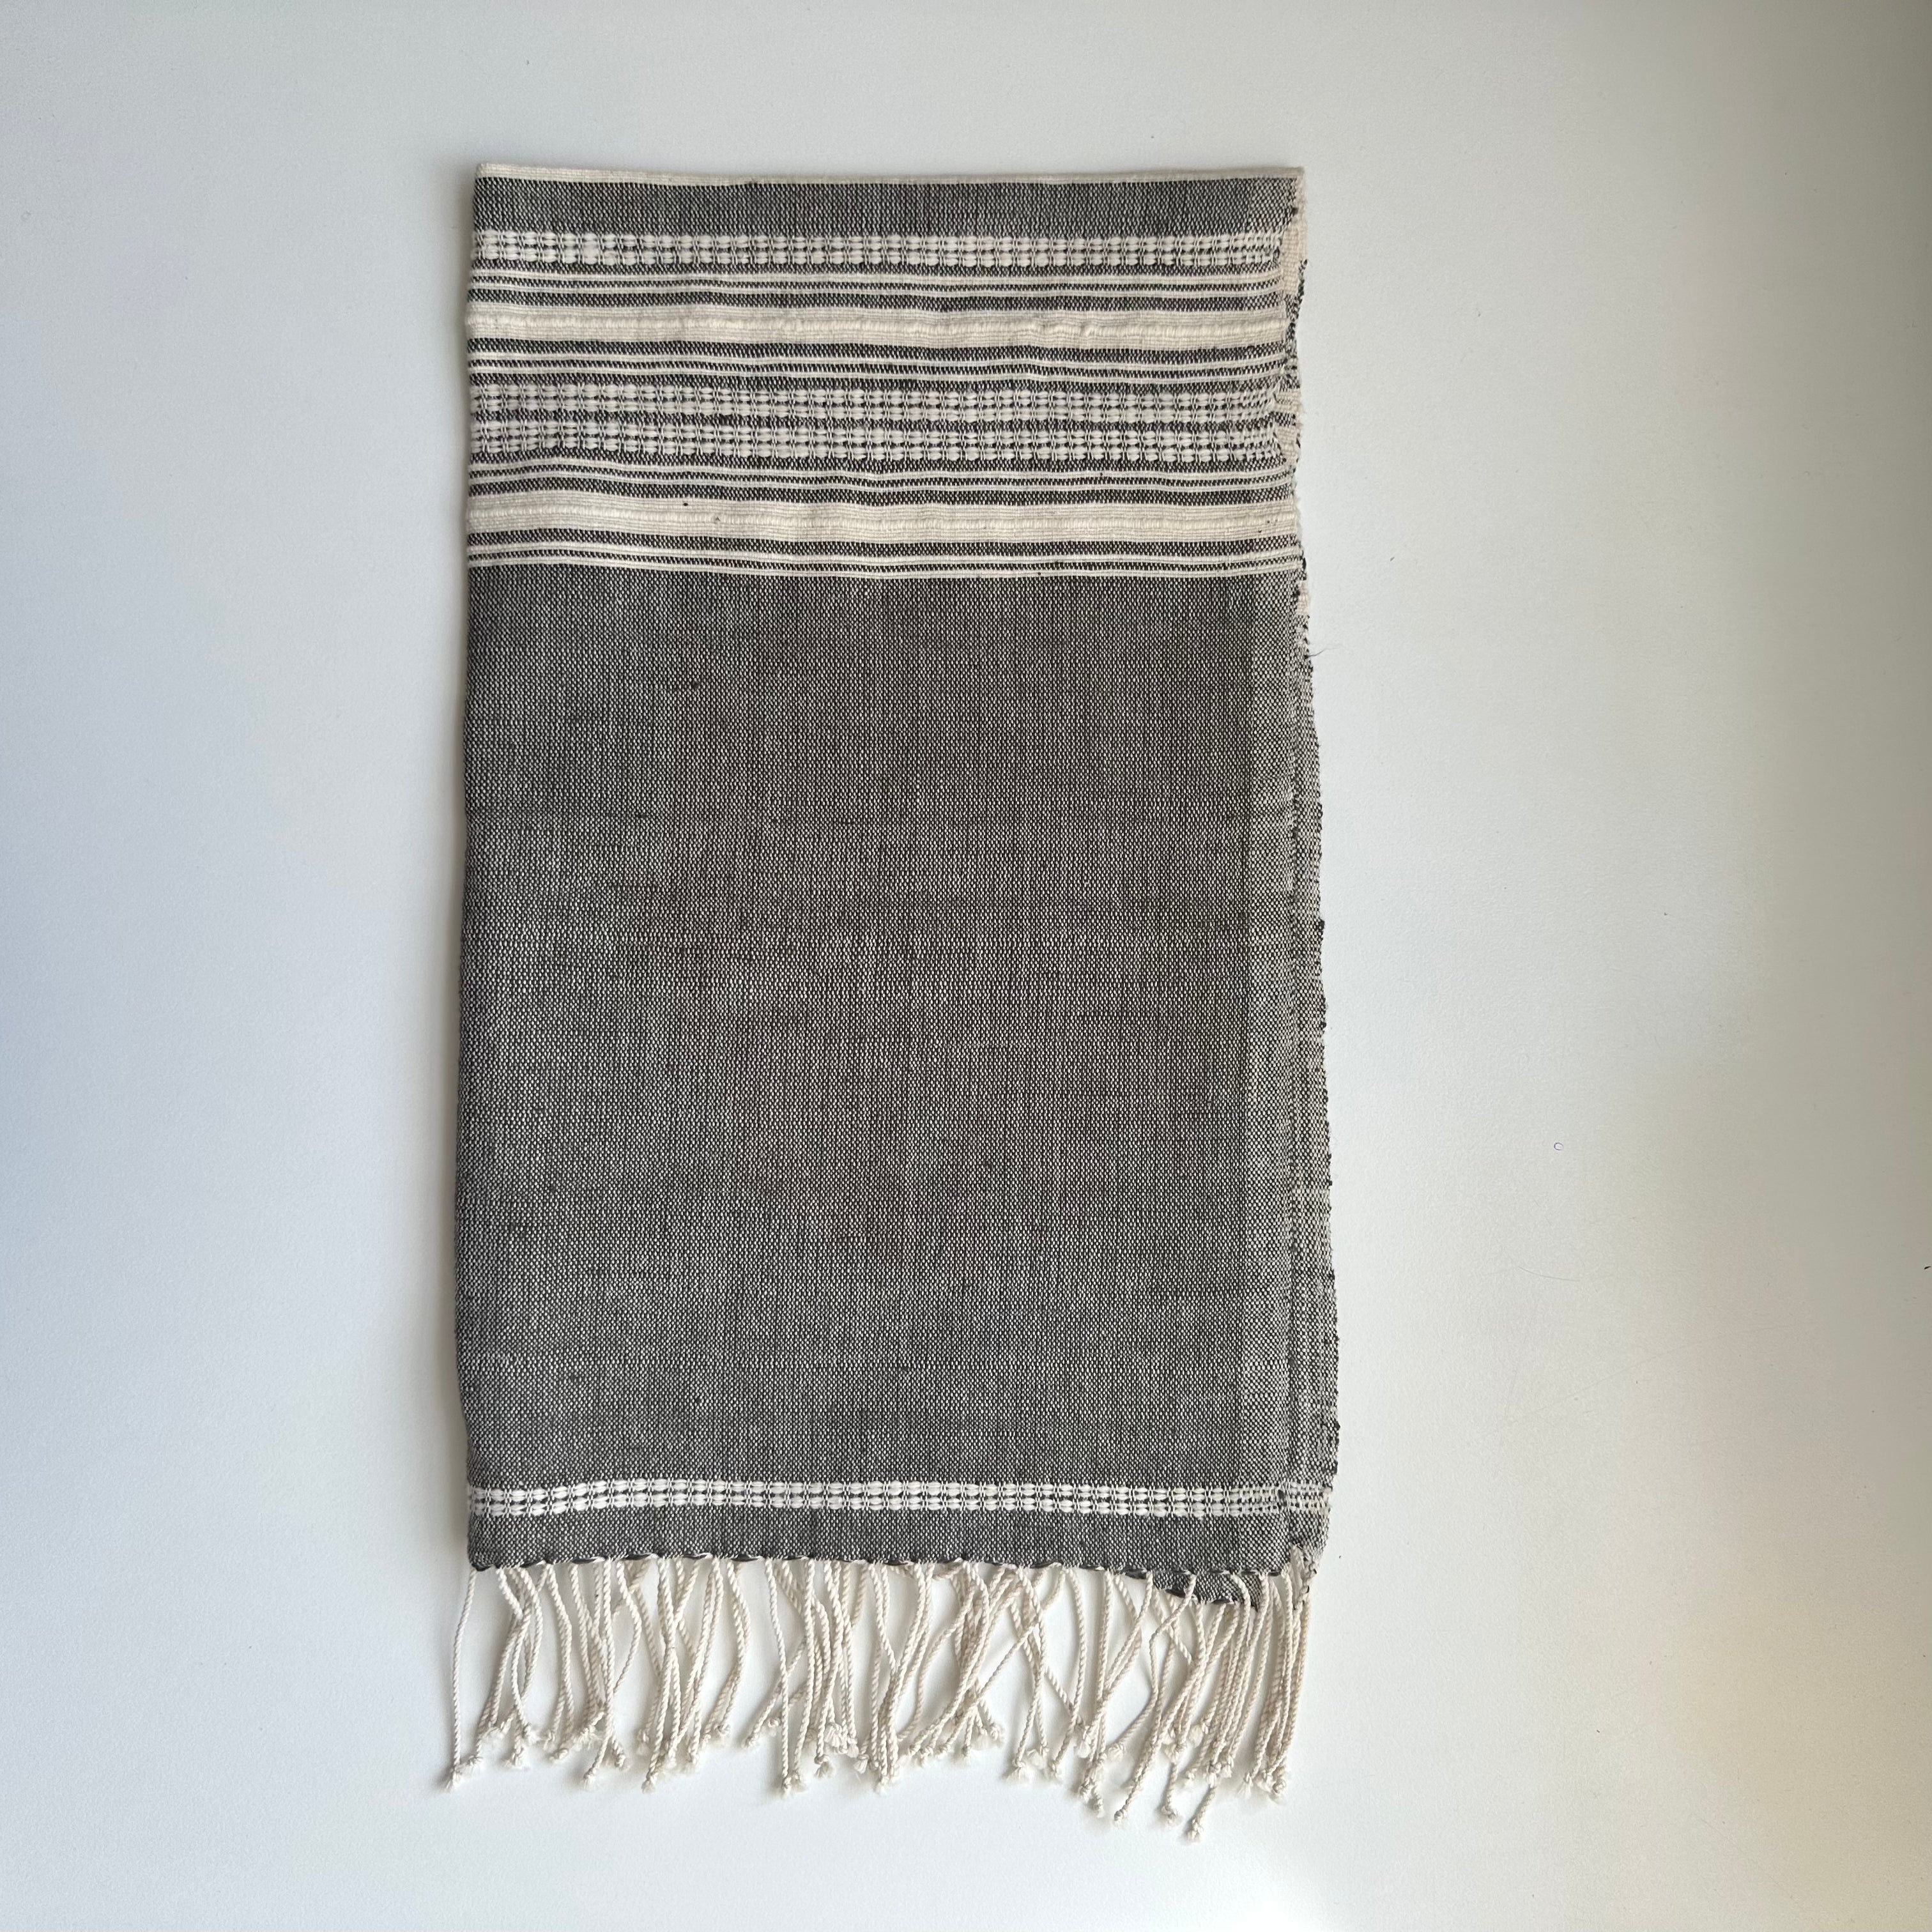 Grey and ivory colored hand spun Ethiopian cotton hand towel